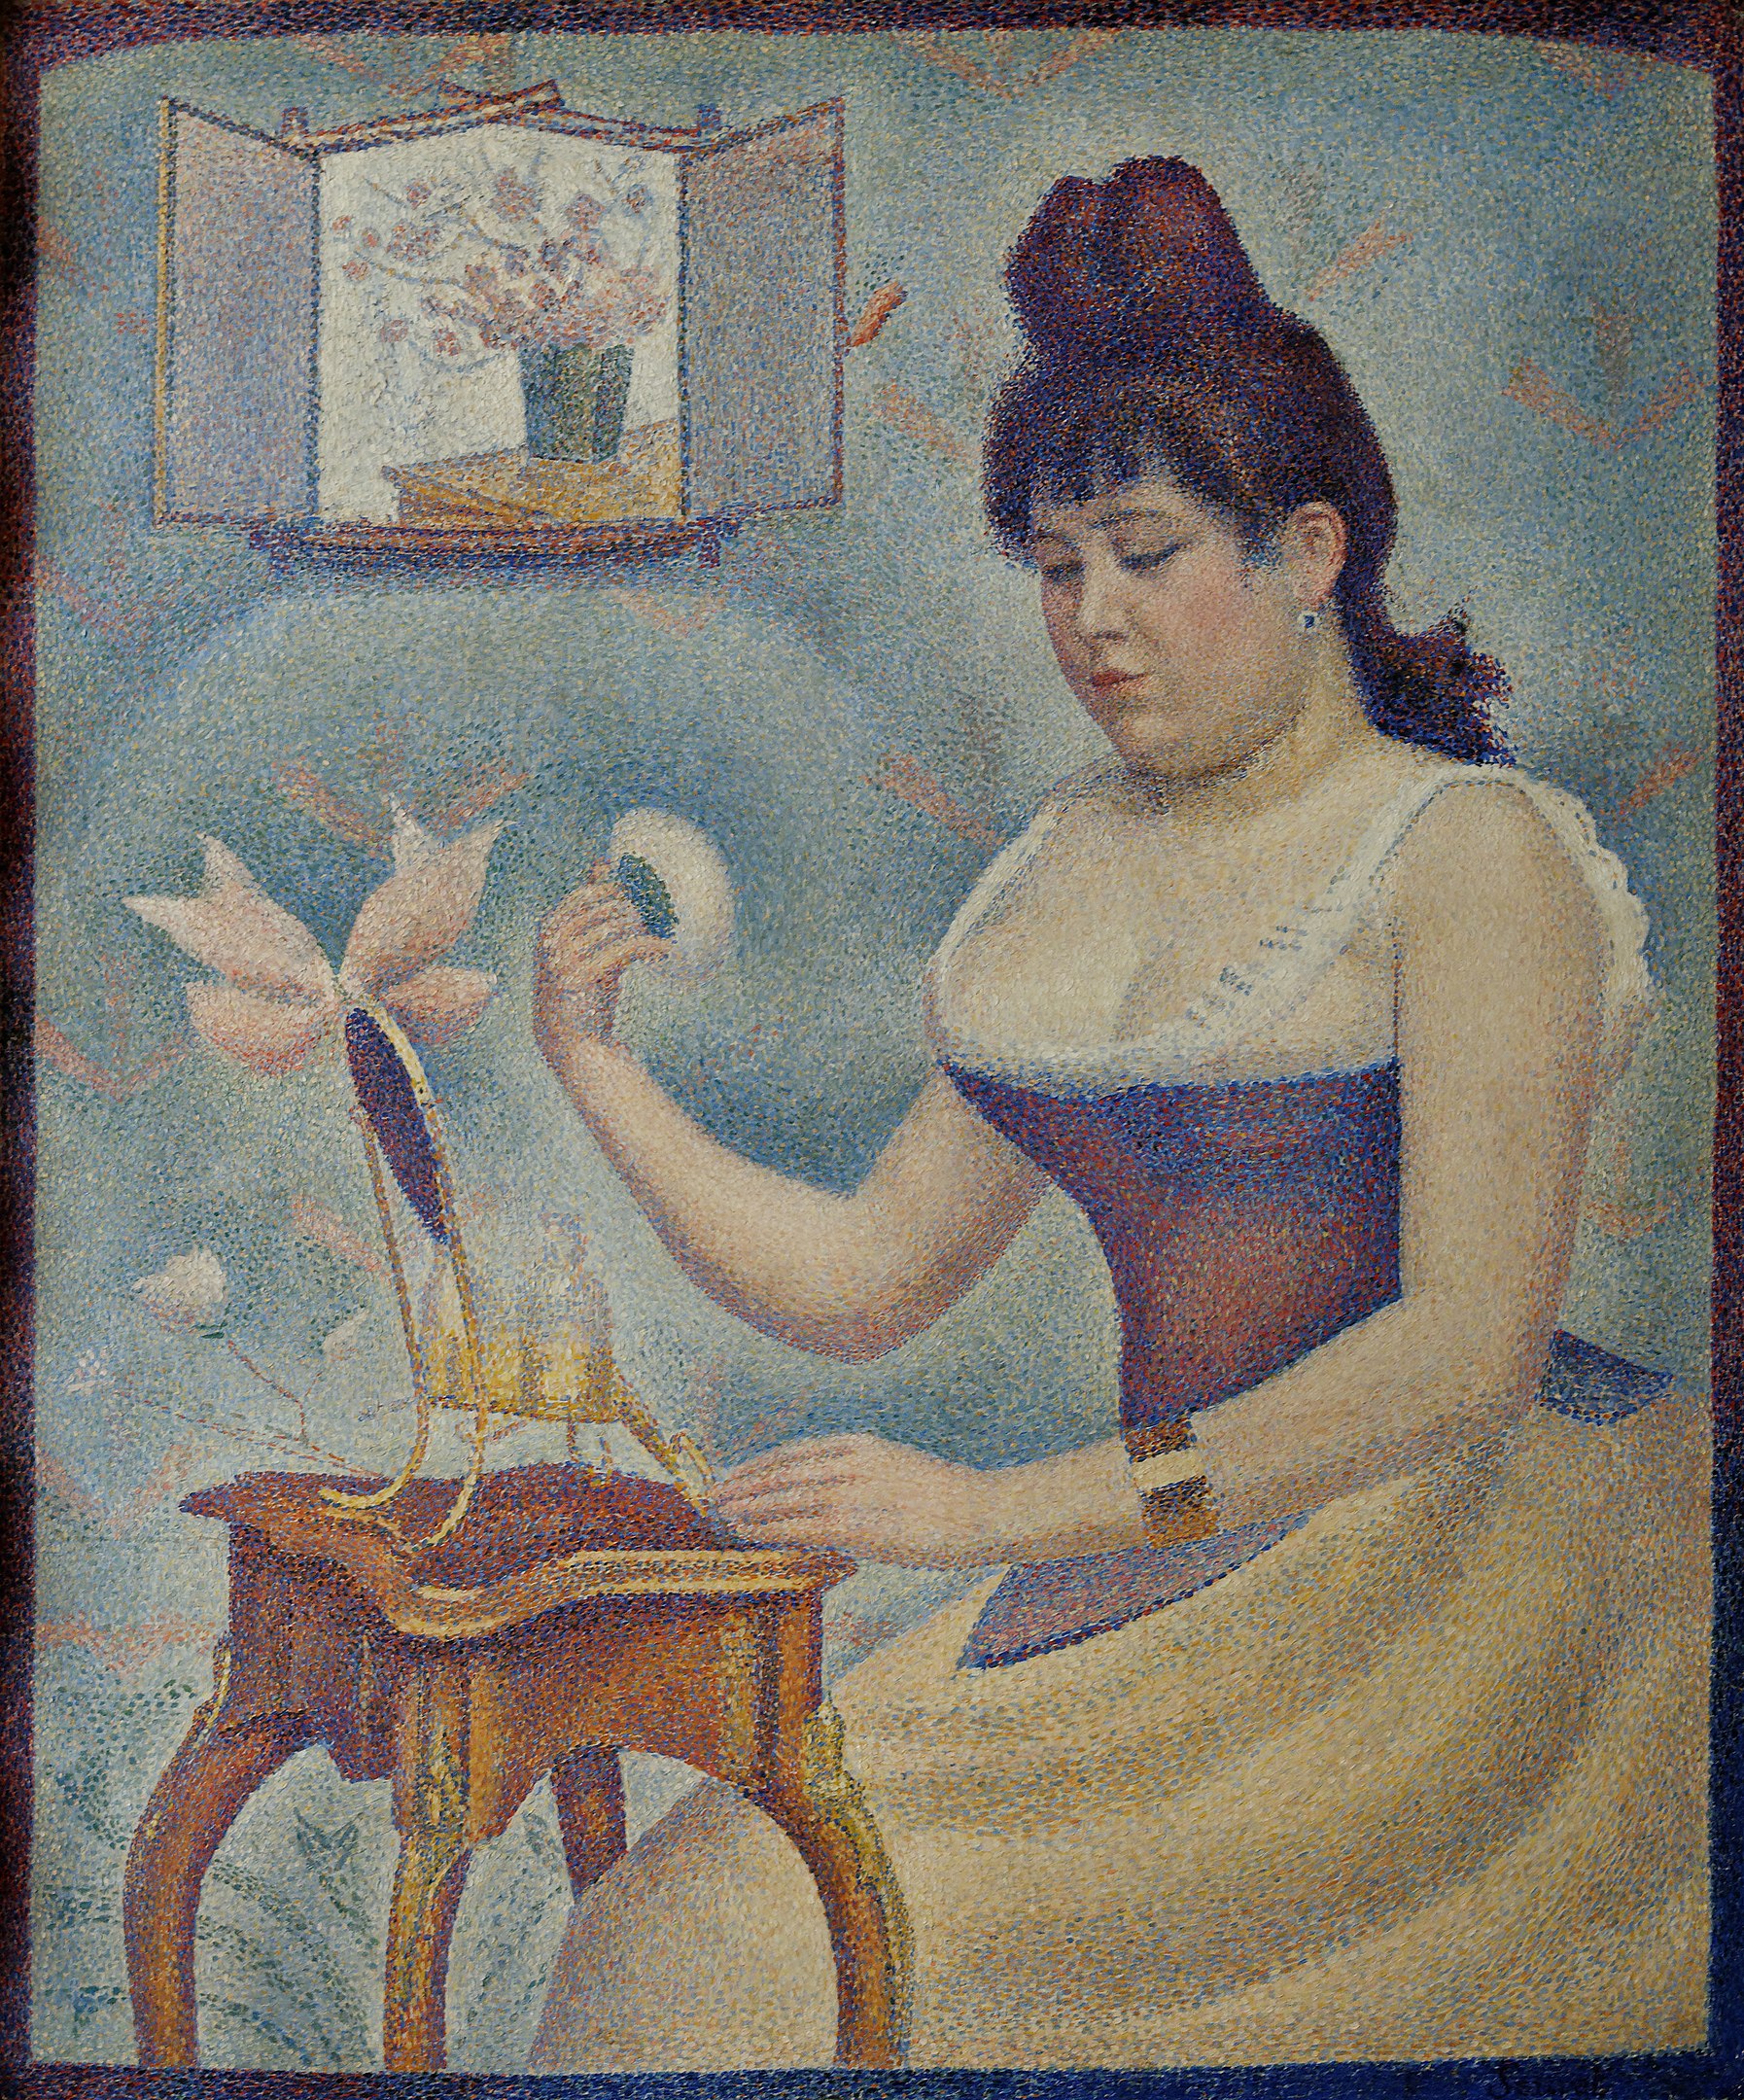 Mujer joven empolvándose by Georges Seurat - 1889 - 1890 - 95,5 x 79,5 cm The Courtauld Gallery